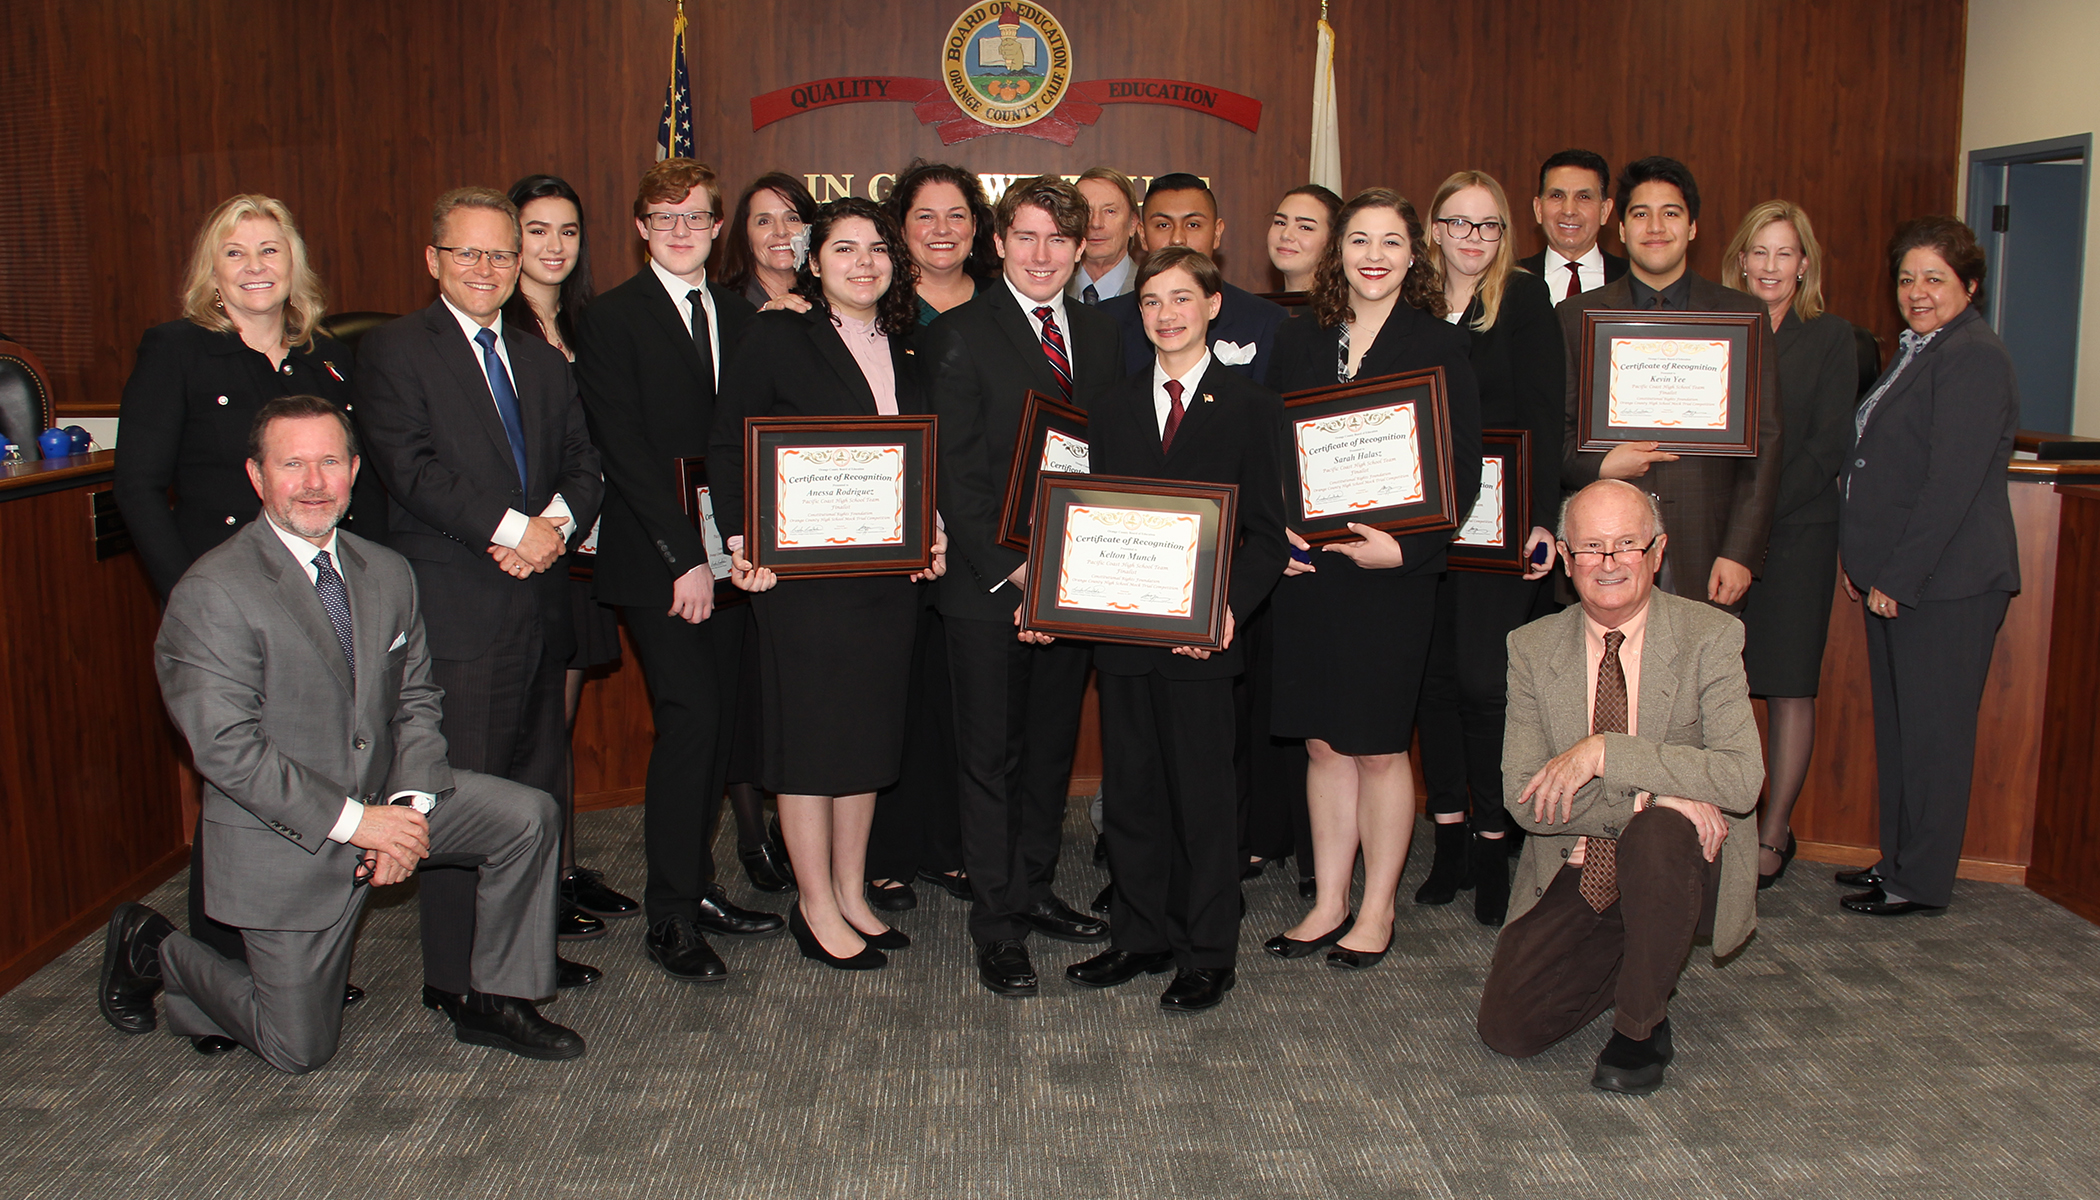 Pacific Coast High School's mock trial team at the board meeting